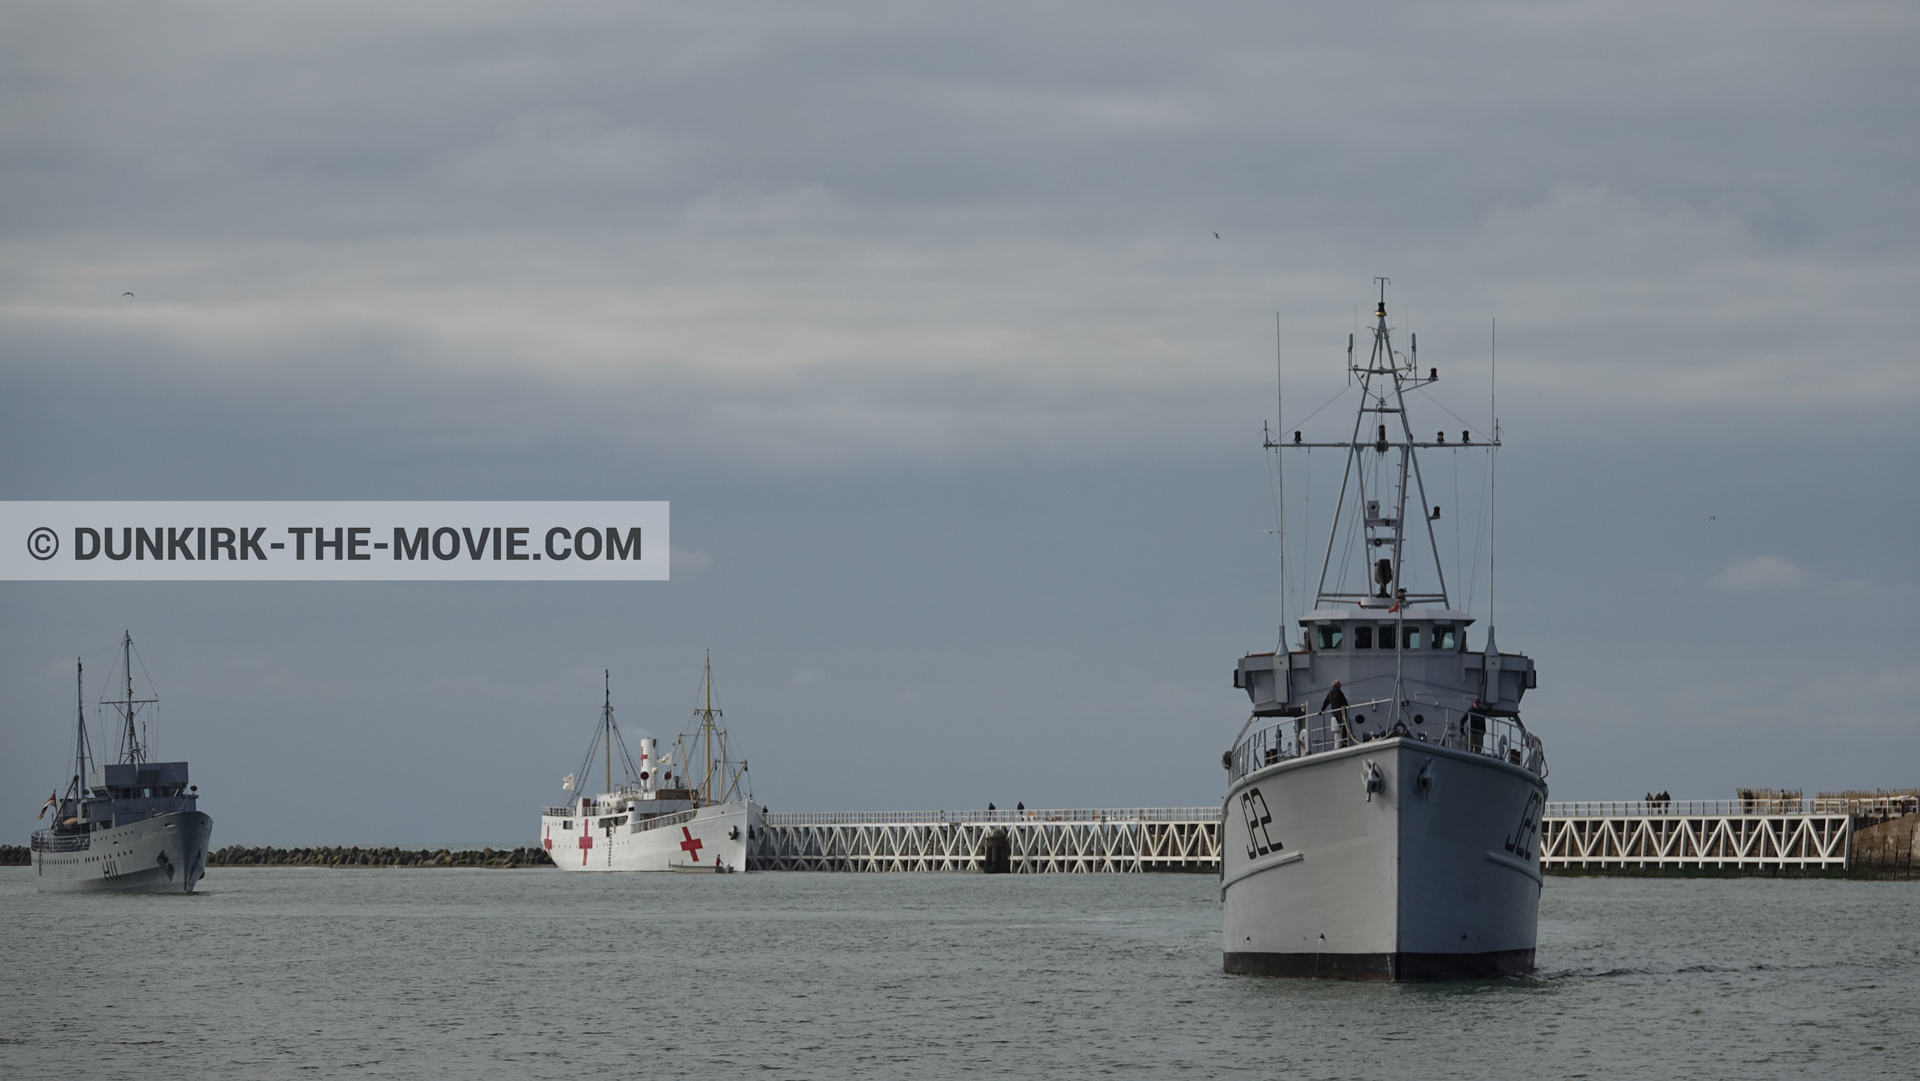 Picture with boat, cloudy sky, H11 - MLV Castor, J22 -Hr.Ms. Naaldwijk, EST pier, calm sea, M/S Rogaland,  from behind the scene of the Dunkirk movie by Nolan